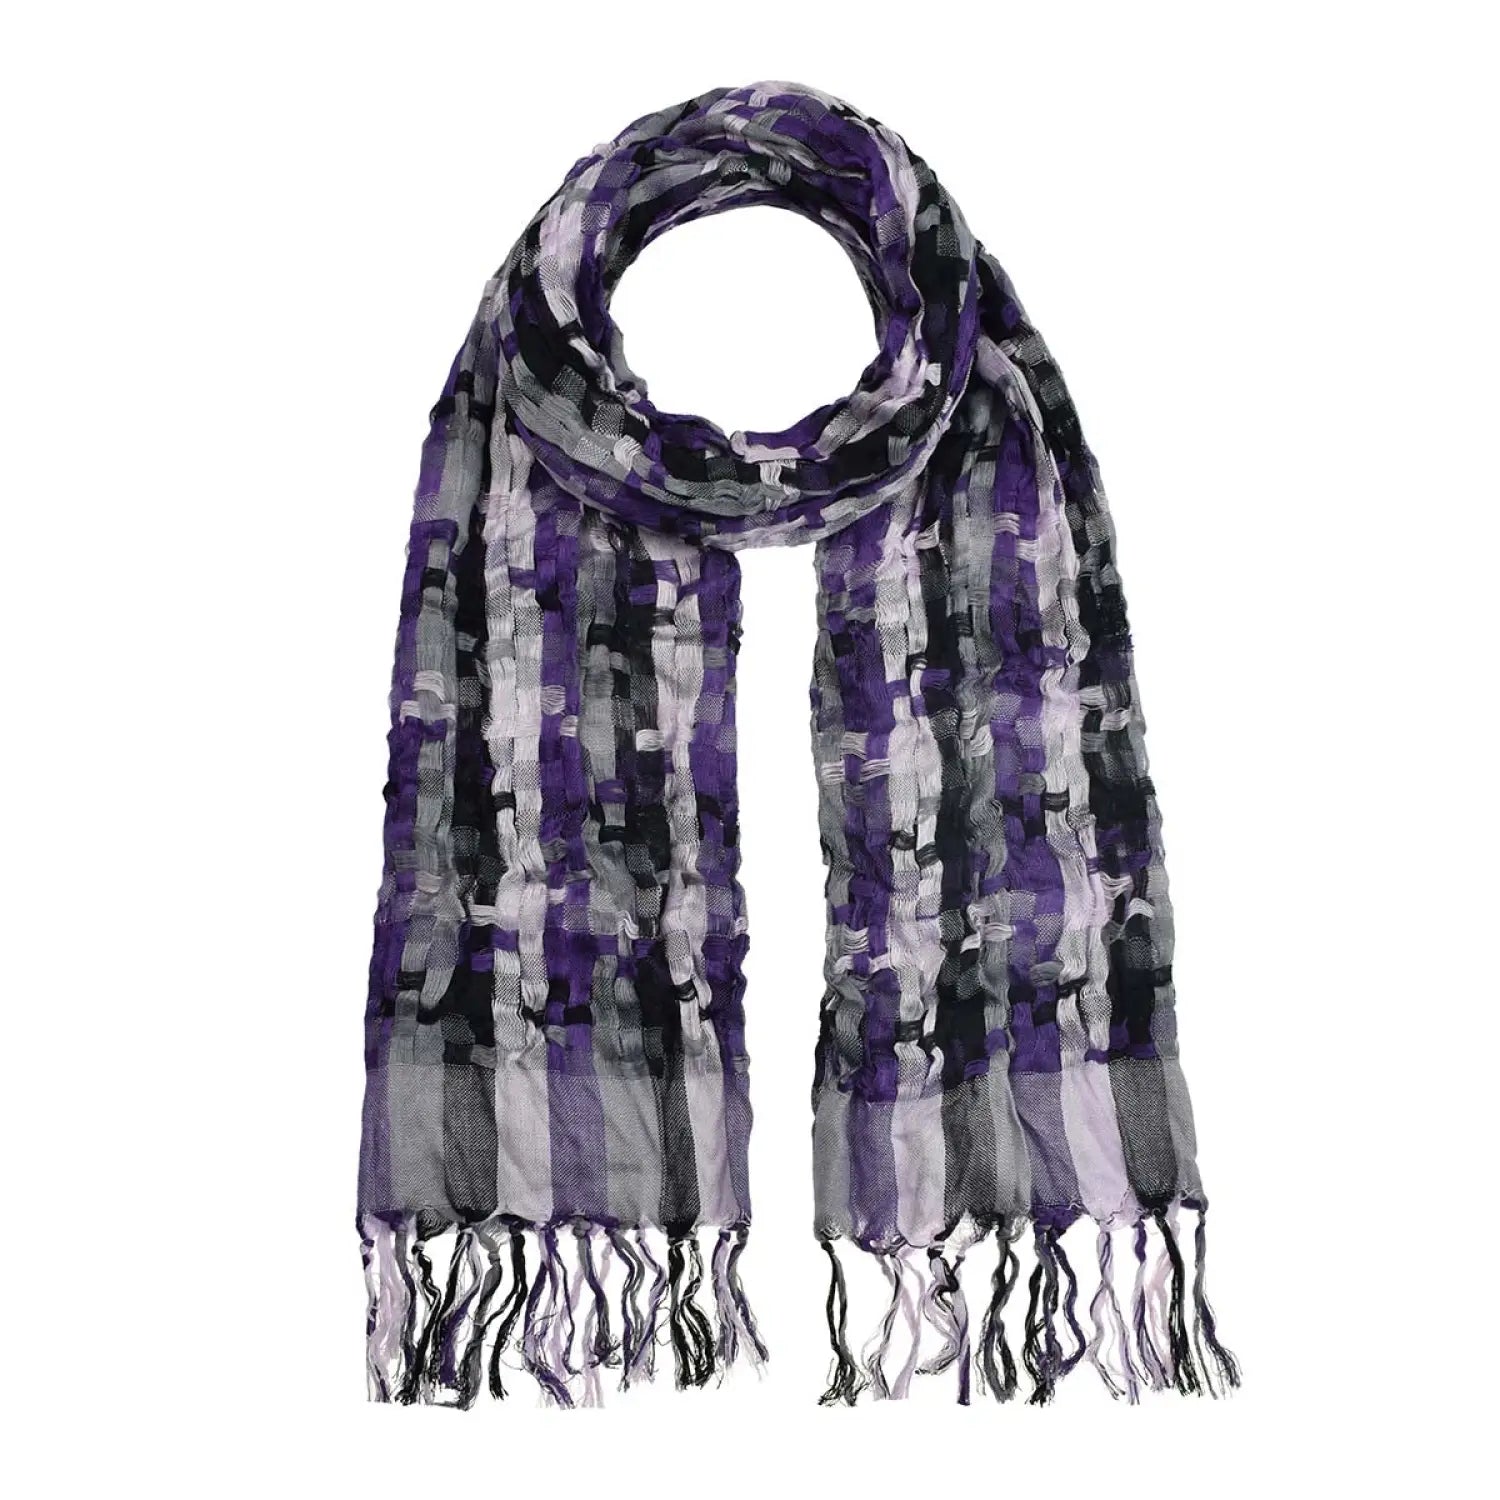 Super soft woven check scarf in purple and black pattern